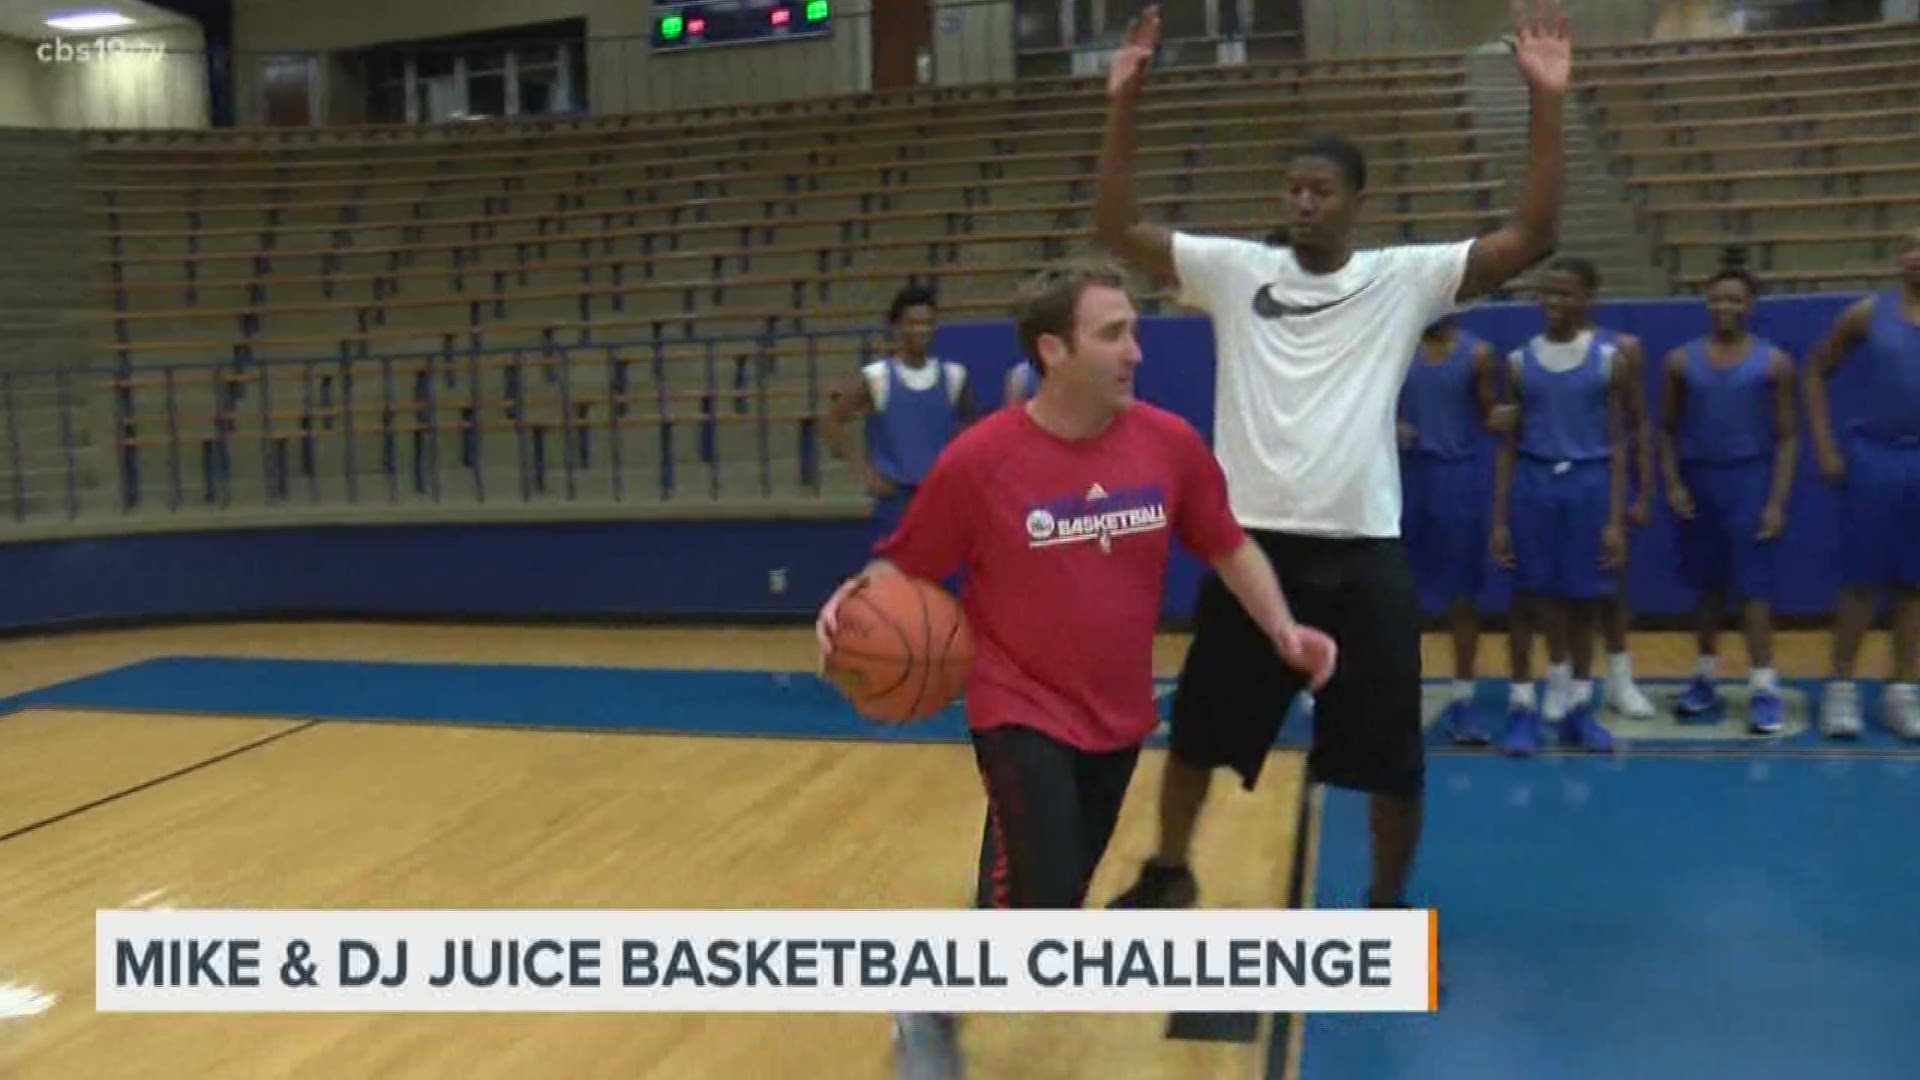 In honor of March Madness, Mike challenged DJ Juice to a game of one-on-one at John Tyler High School. DJ Juice joined The Morning Loop to chat about the outcome.